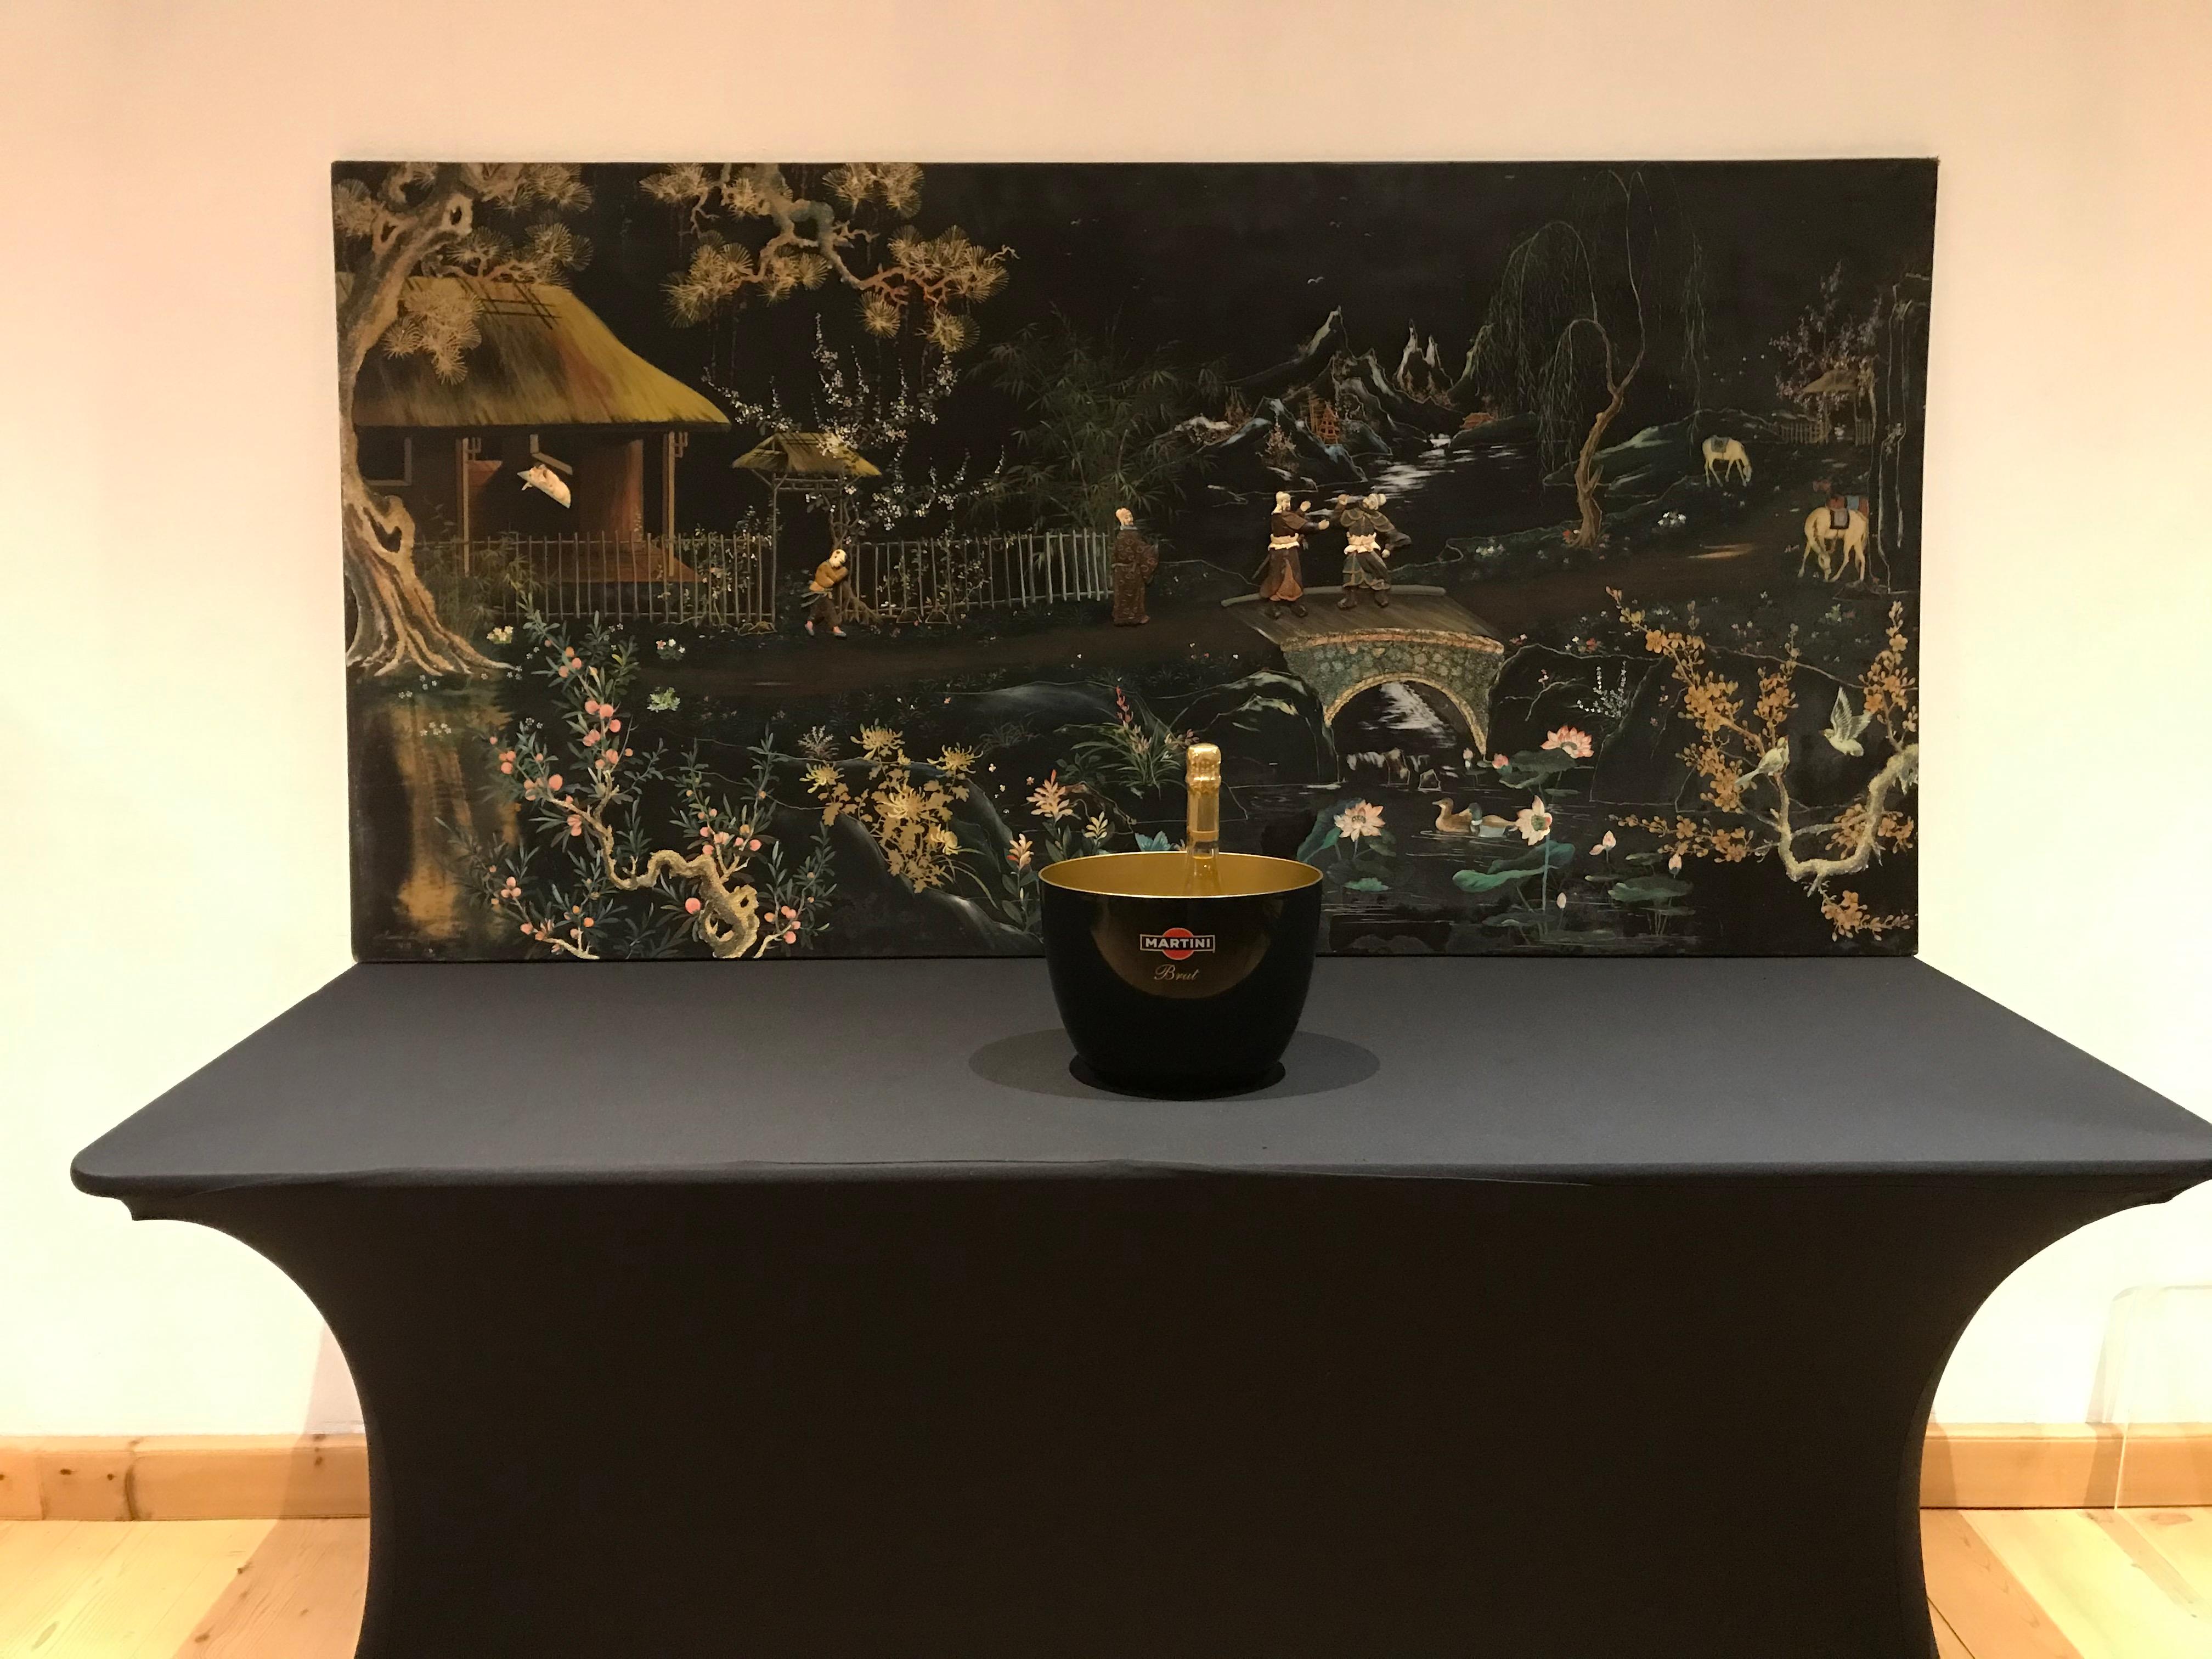 Large Vietnamese black lacquer panel circa 1960s.
This vintage lacquer painting on canvas is mounted on wood frame with two metal hook to hang.
The landscape is on black lacquer ground. You see beautiful flowers, trees, birds and animals. Also